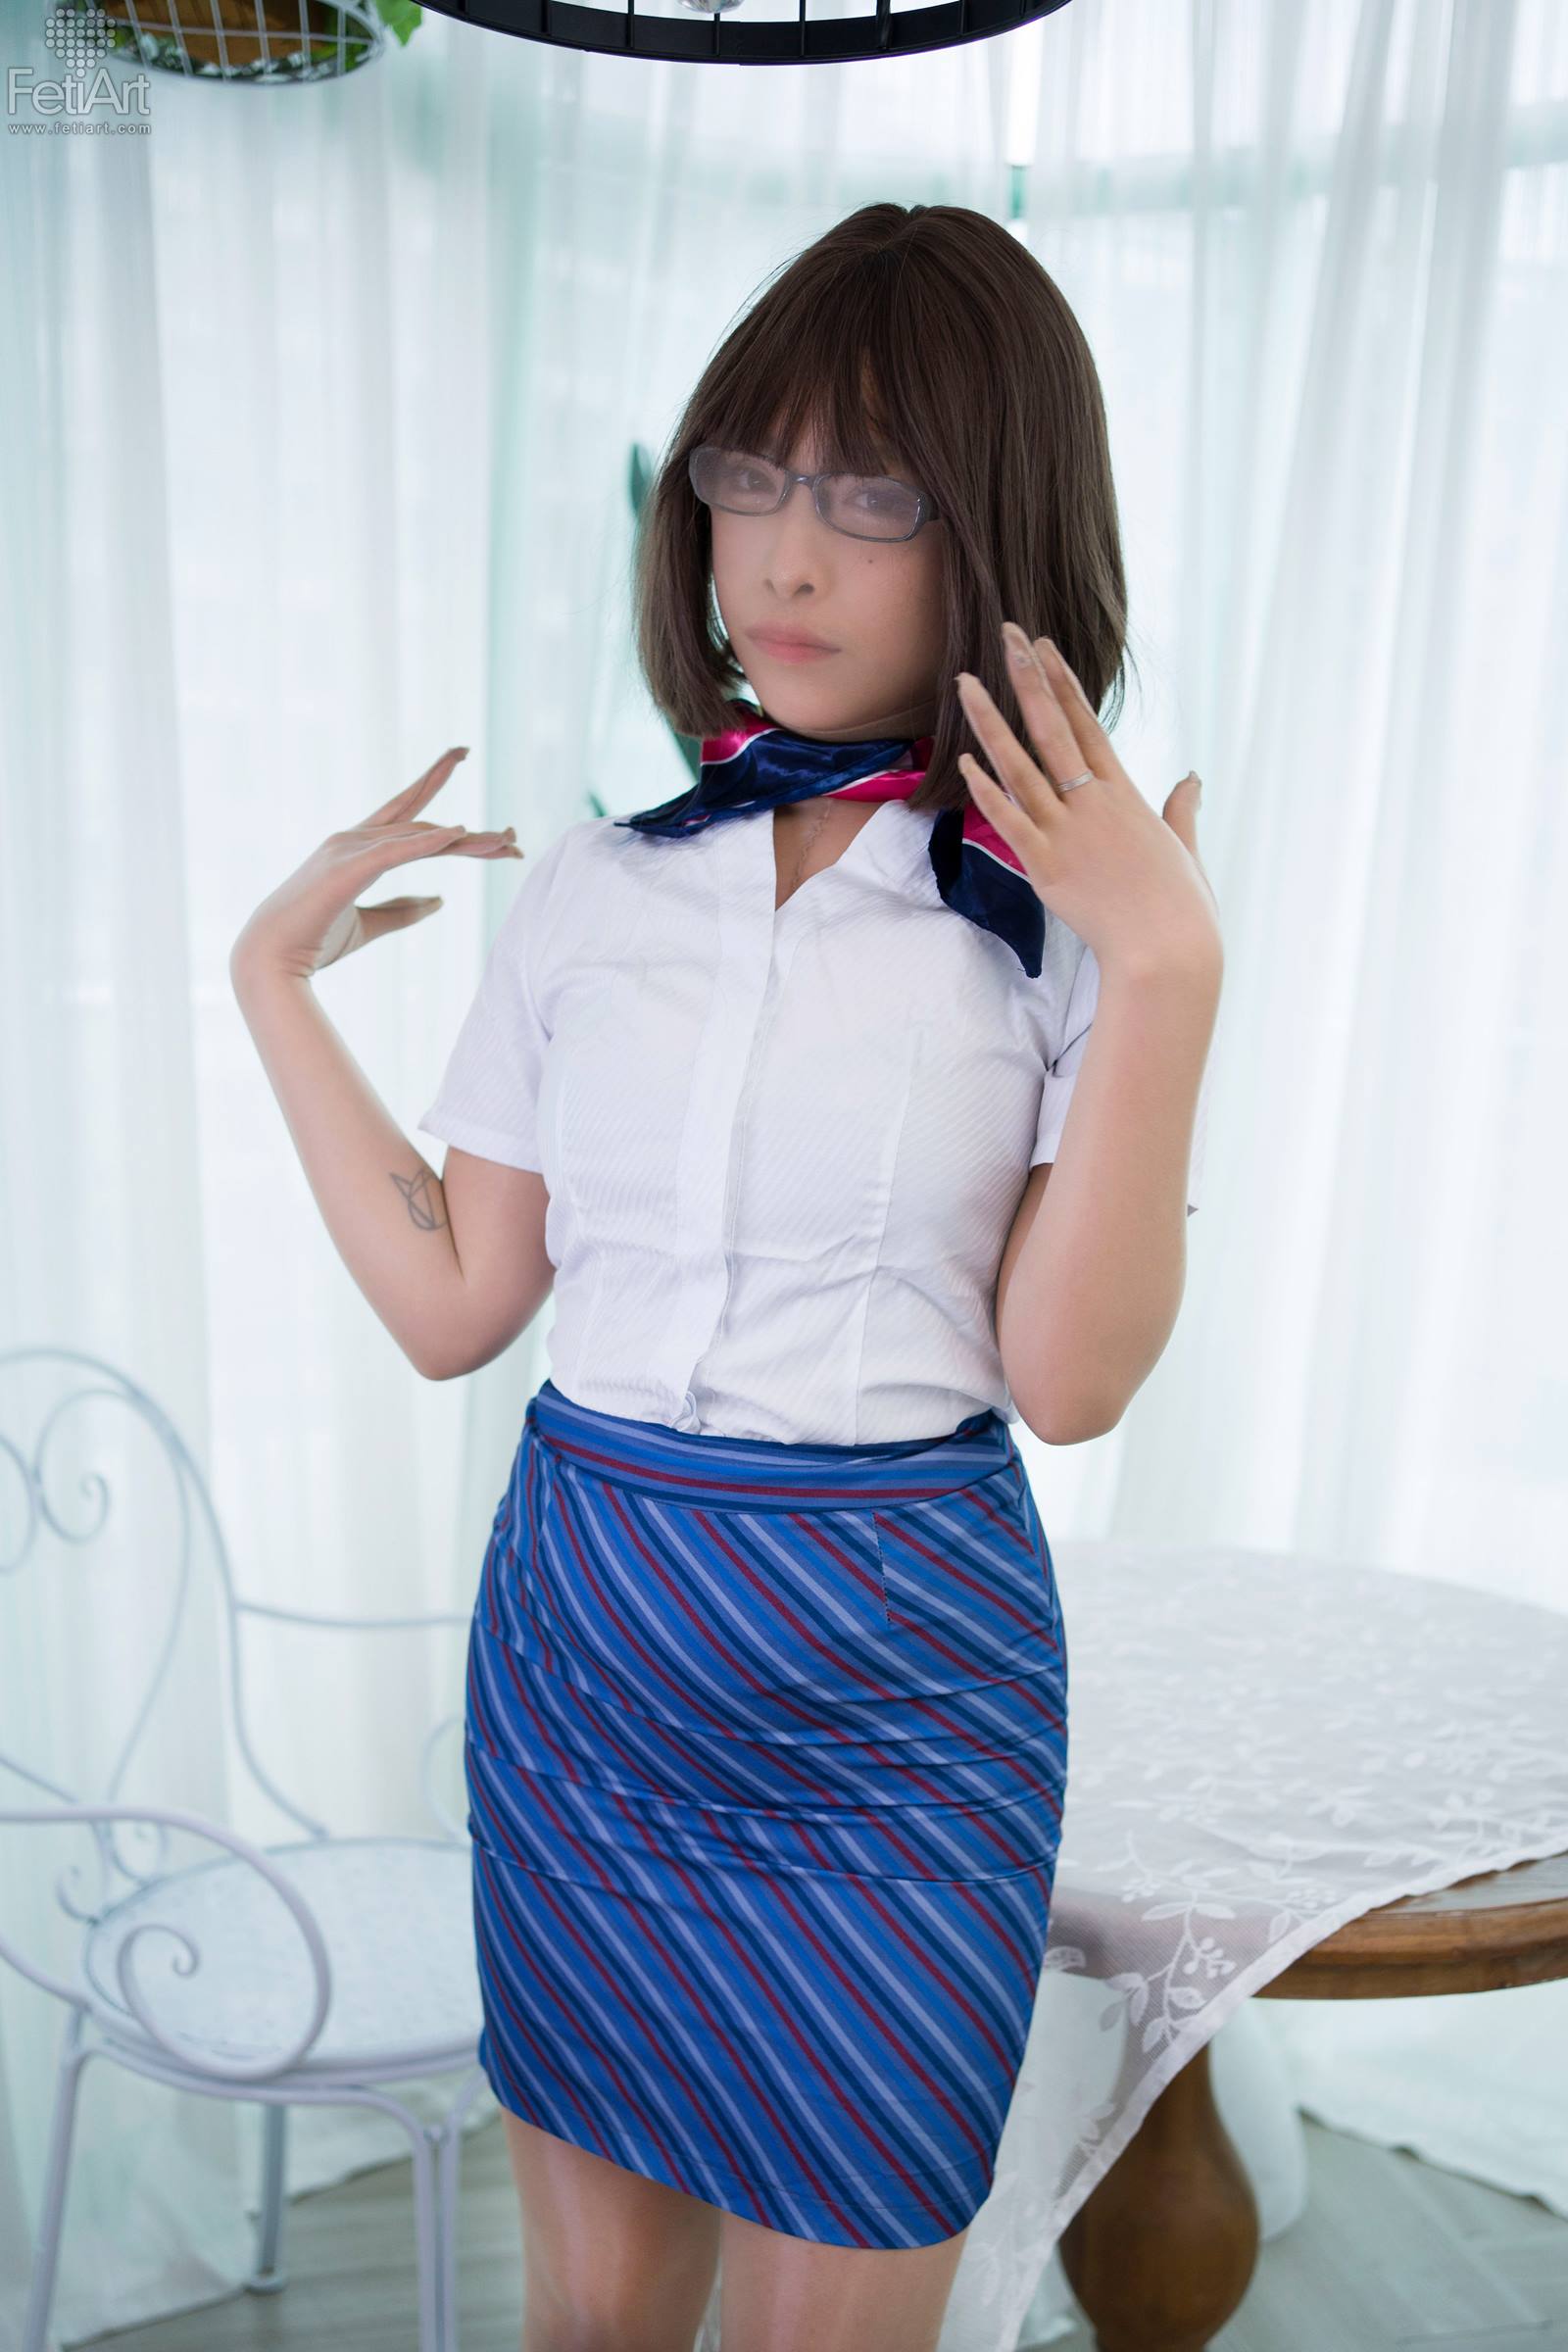 [FetiArt尚物集]NO.00074 Stewardess’s Special Interests[46P/108MB]插图2